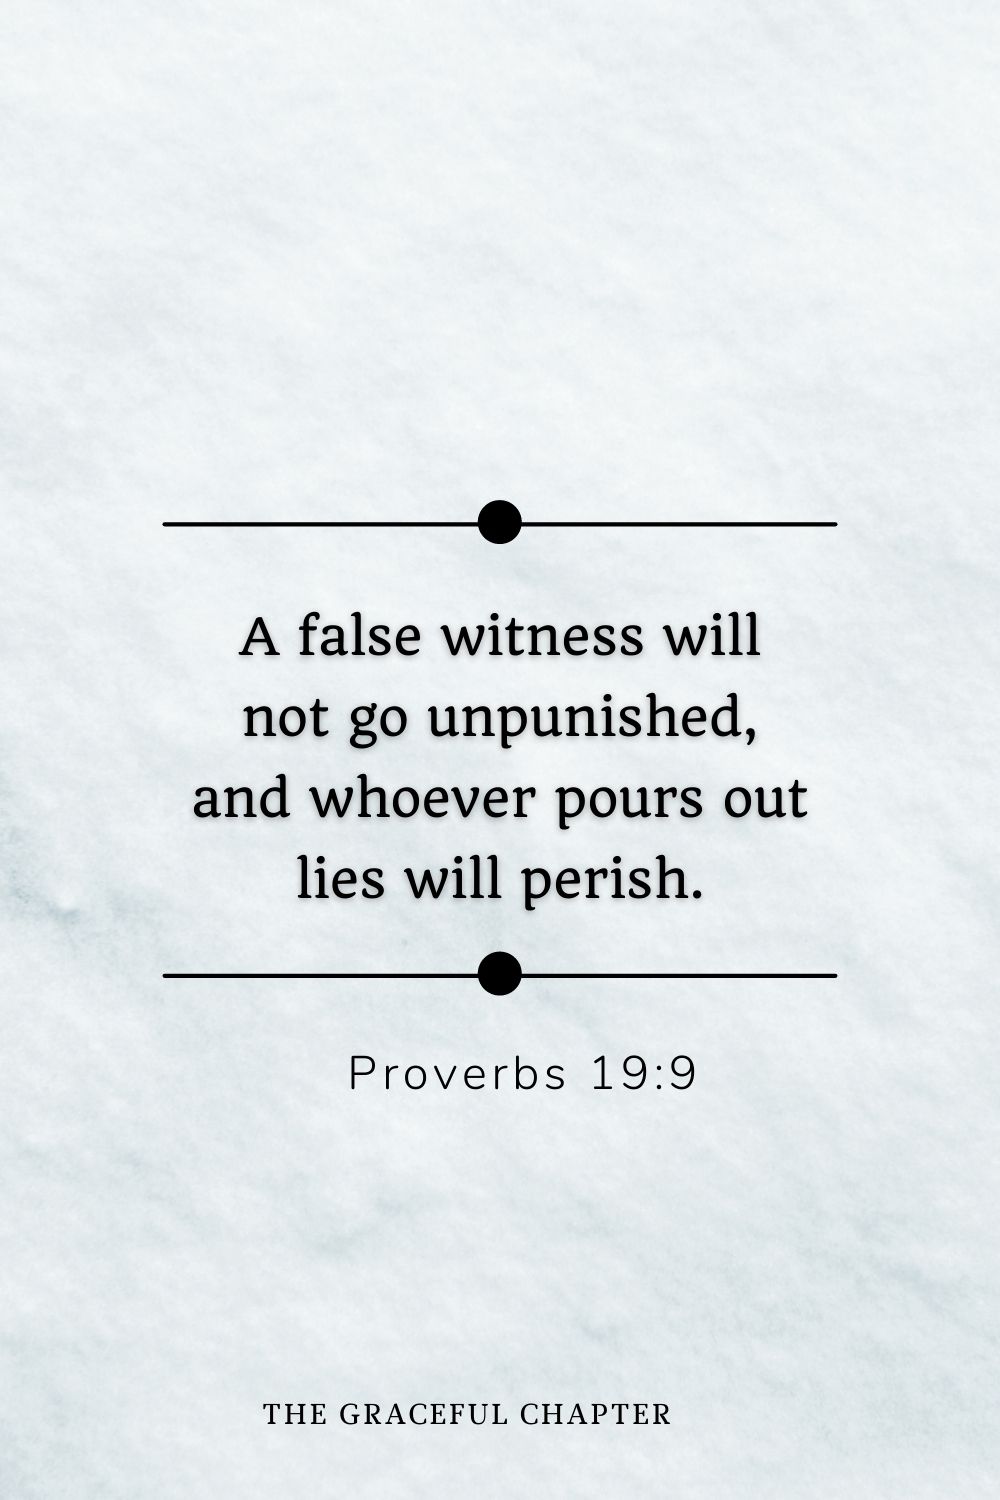 A false witness will not go unpunished, and whoever pours out lies will perish. Proverbs 19:9